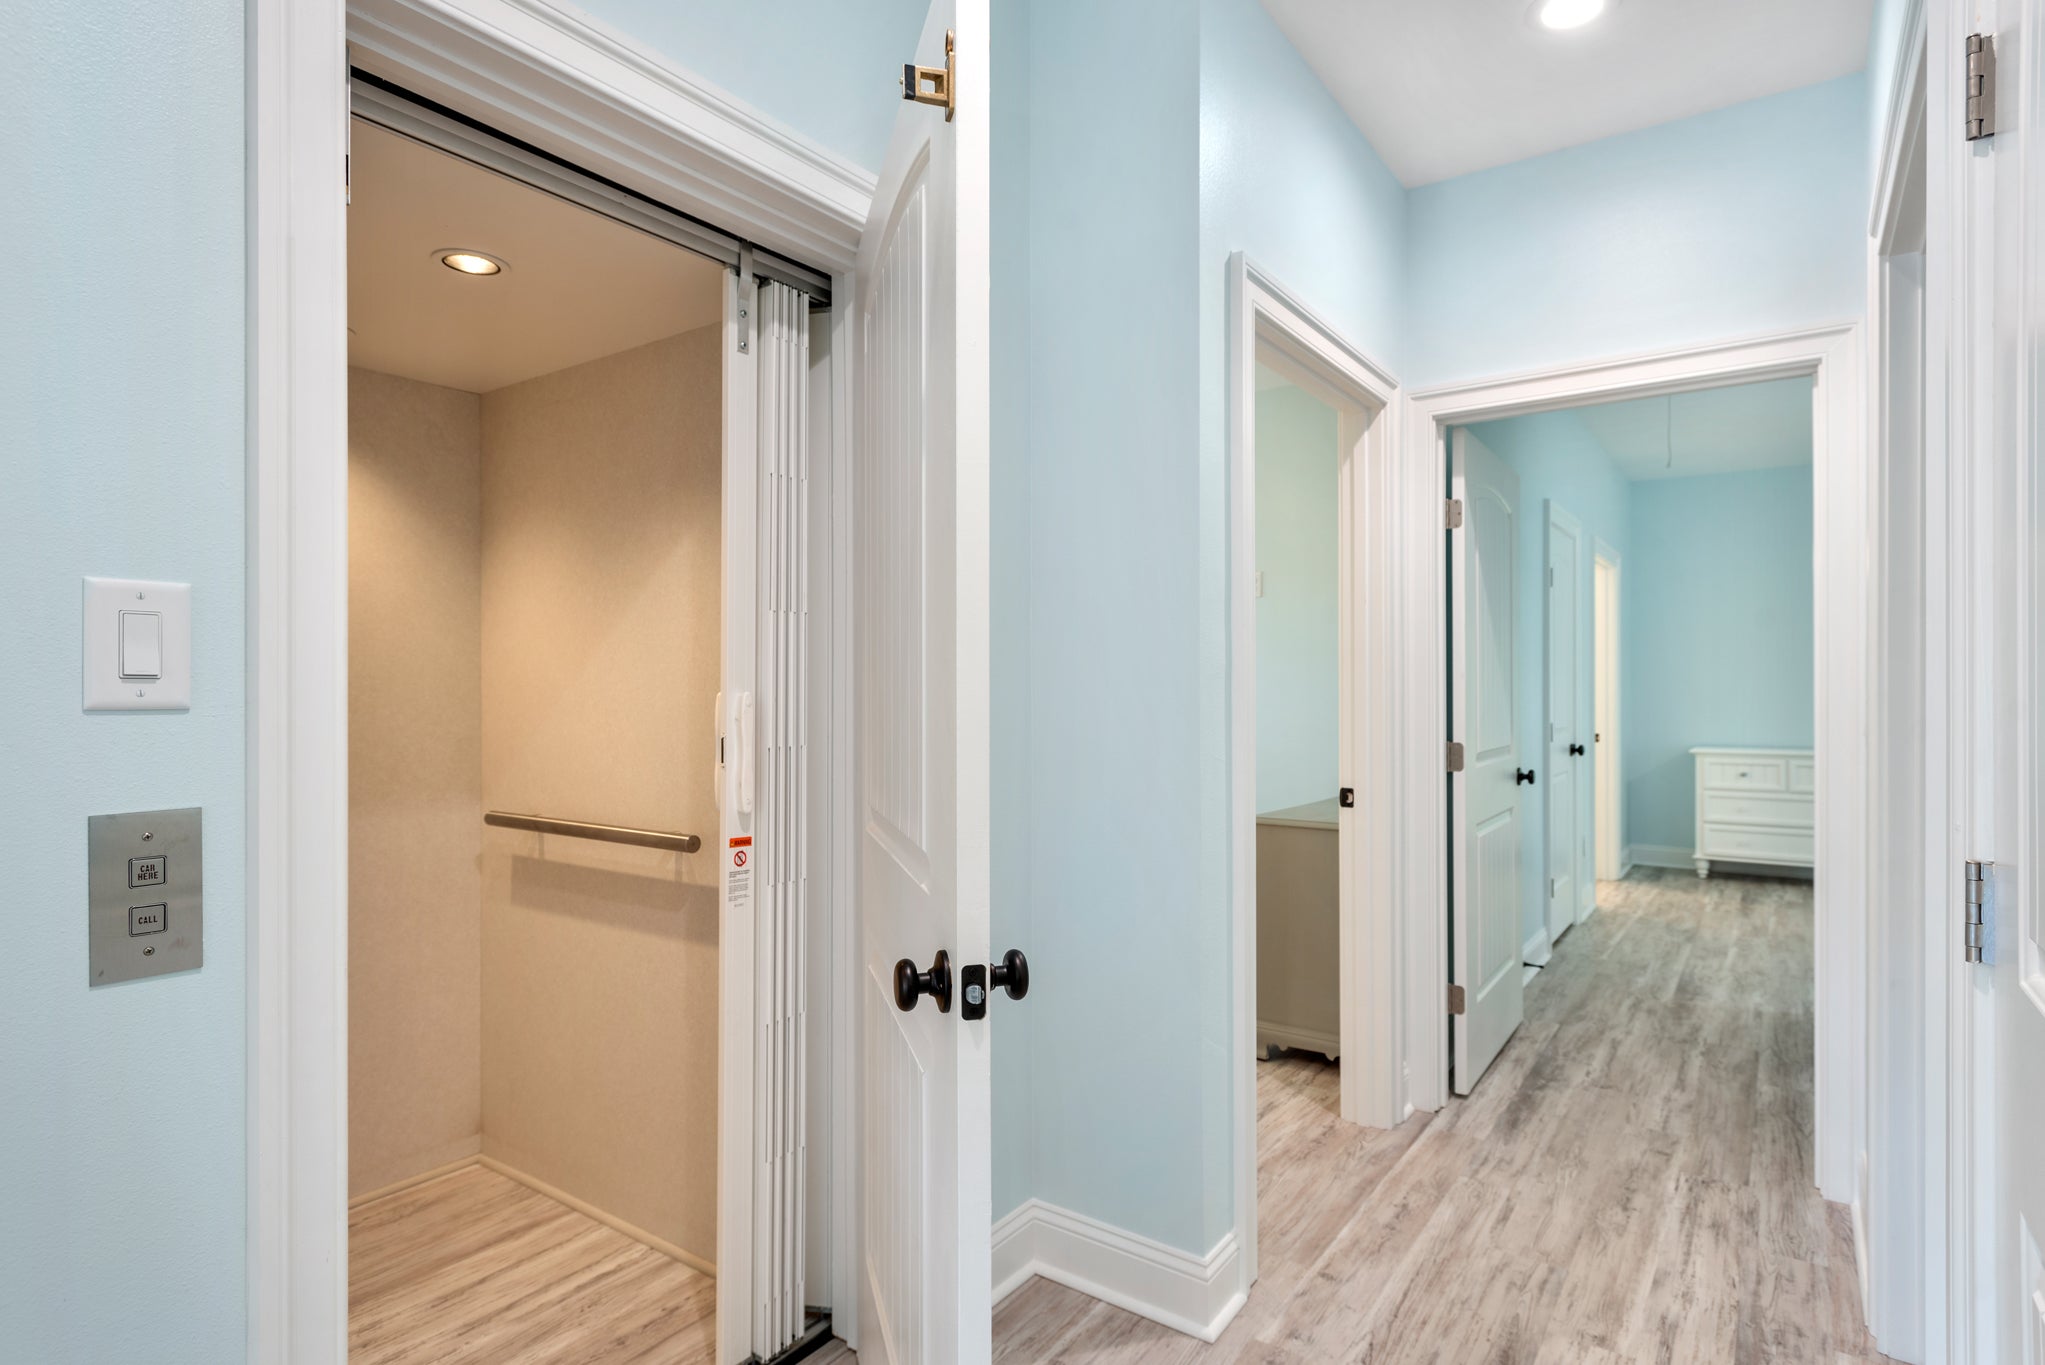 JR9706: Tranquility Cove | Top Level Elevator Access